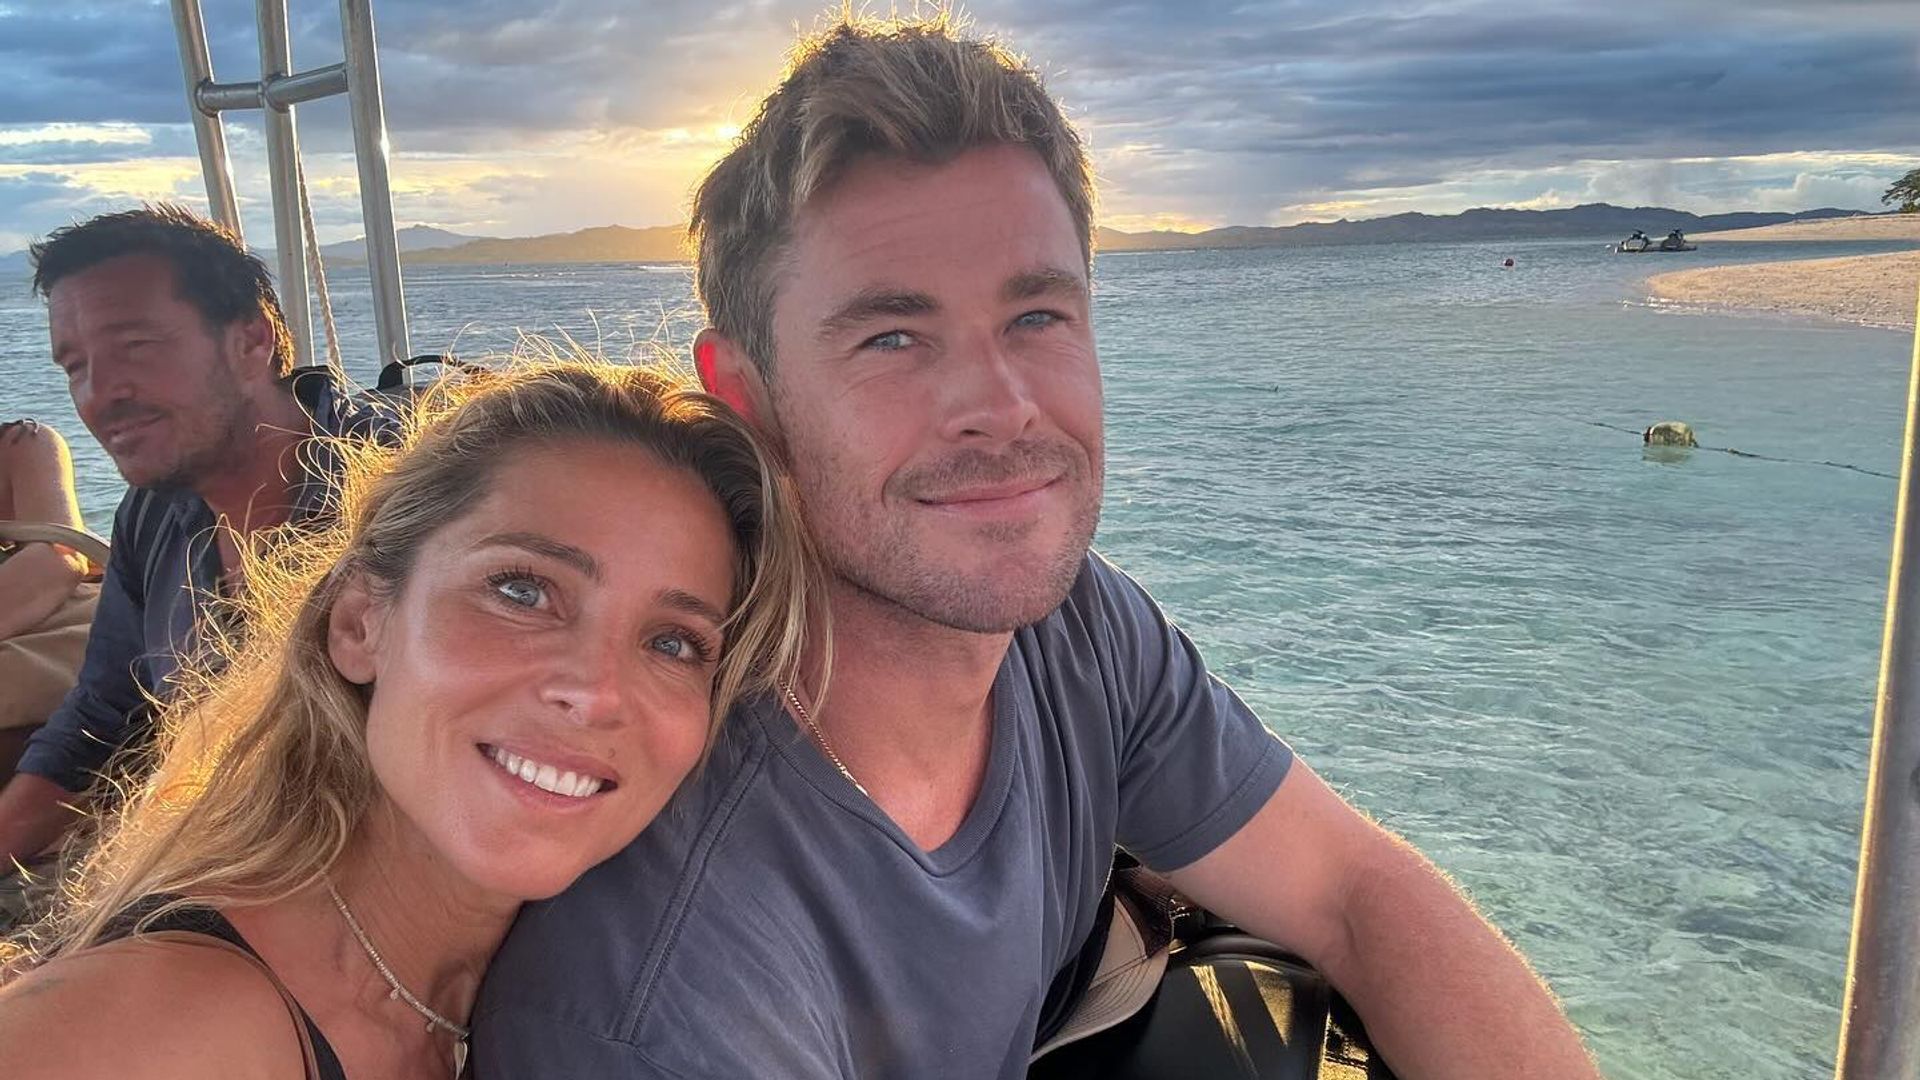 Inside Chris Hemsworth's insane home gym where he works out with his wife Elsa Pataky and 3 kids